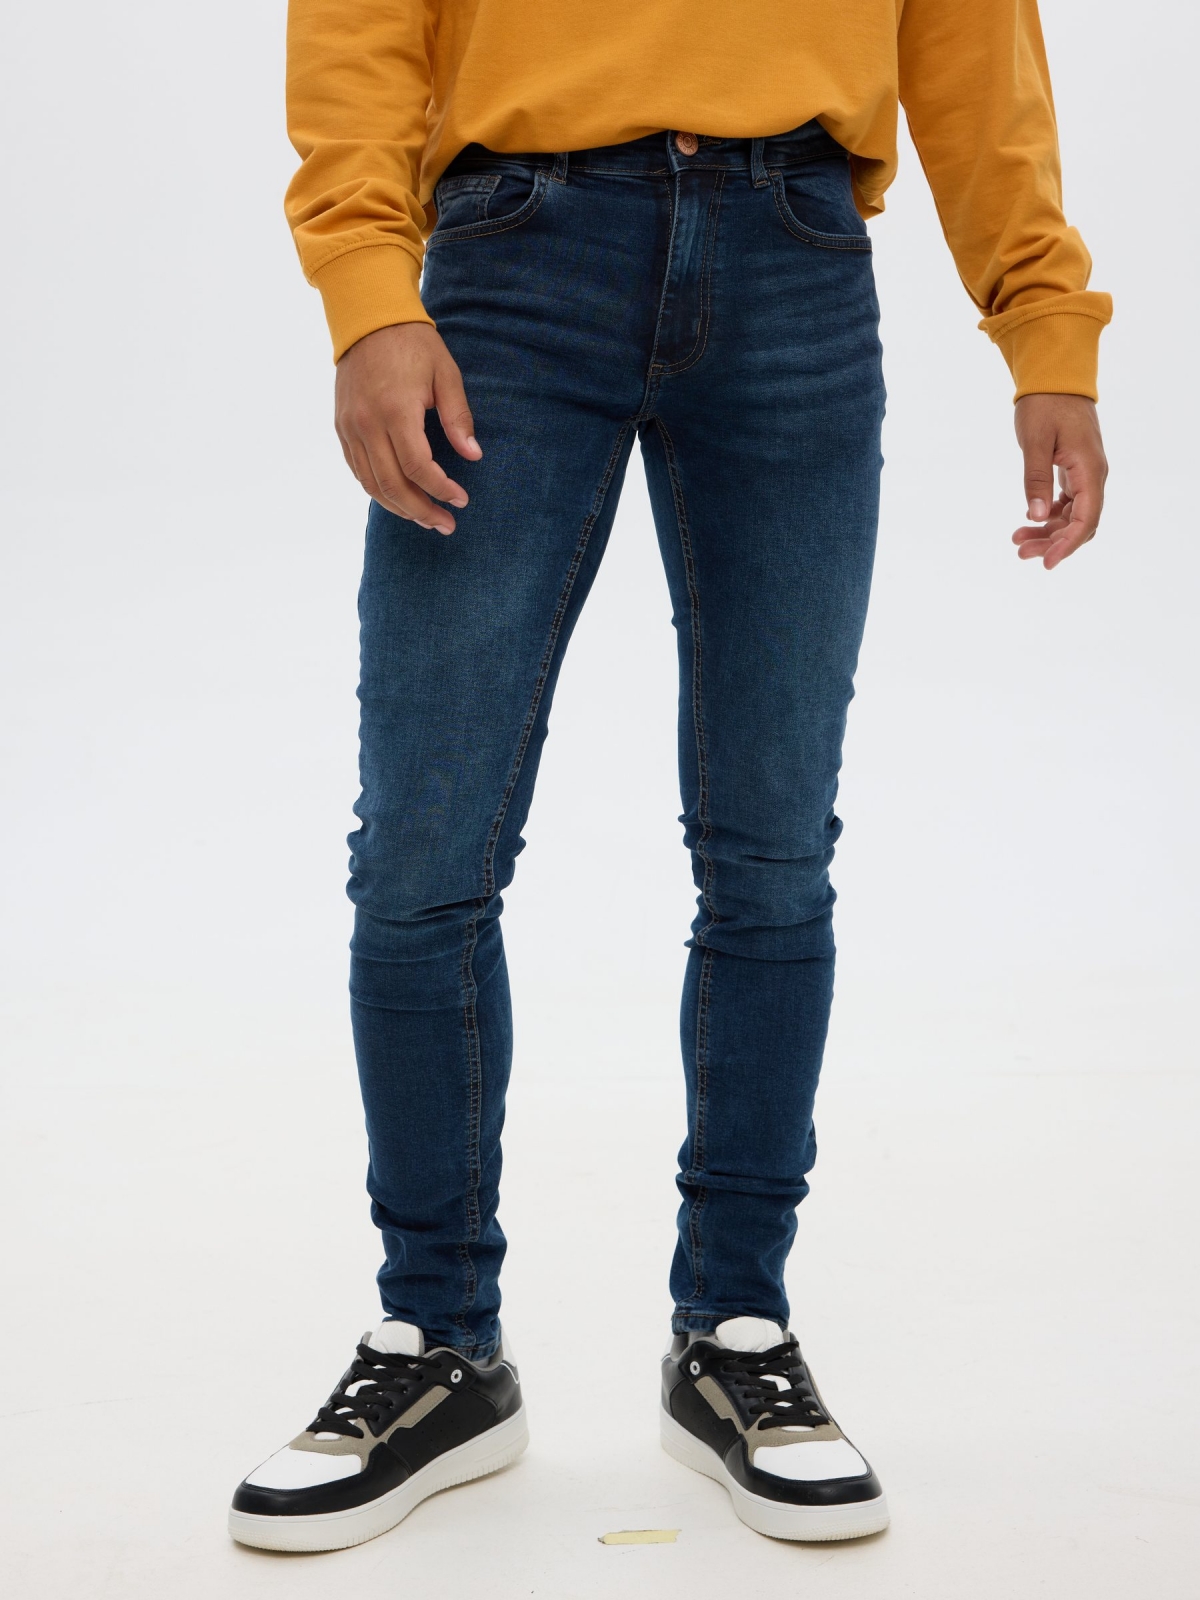 SuperSlim Jeans blue middle back view